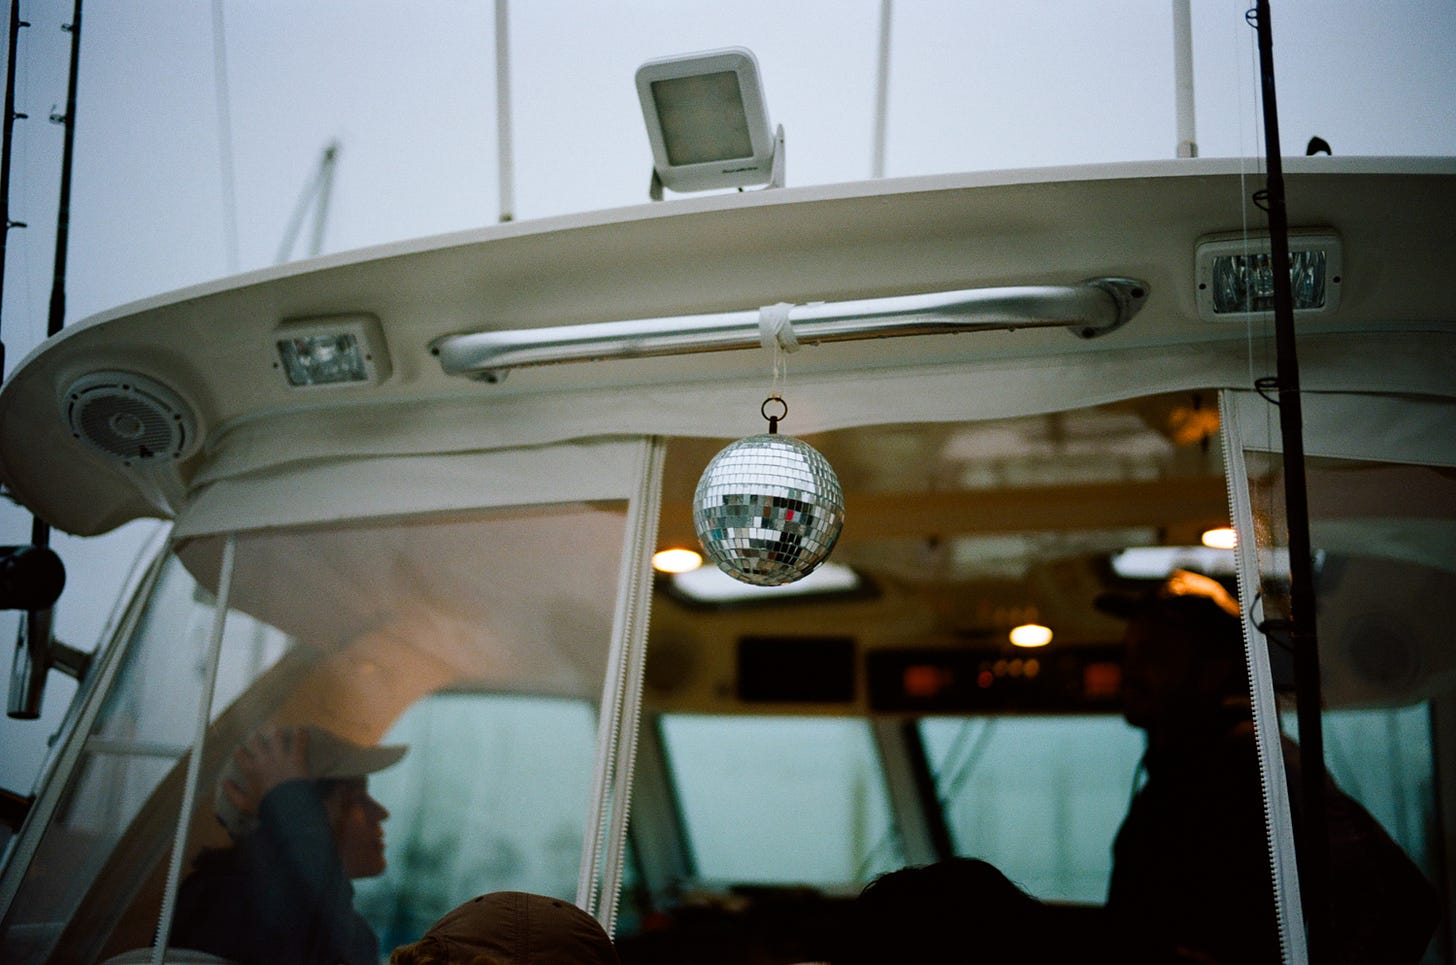 The boat and its disco ball